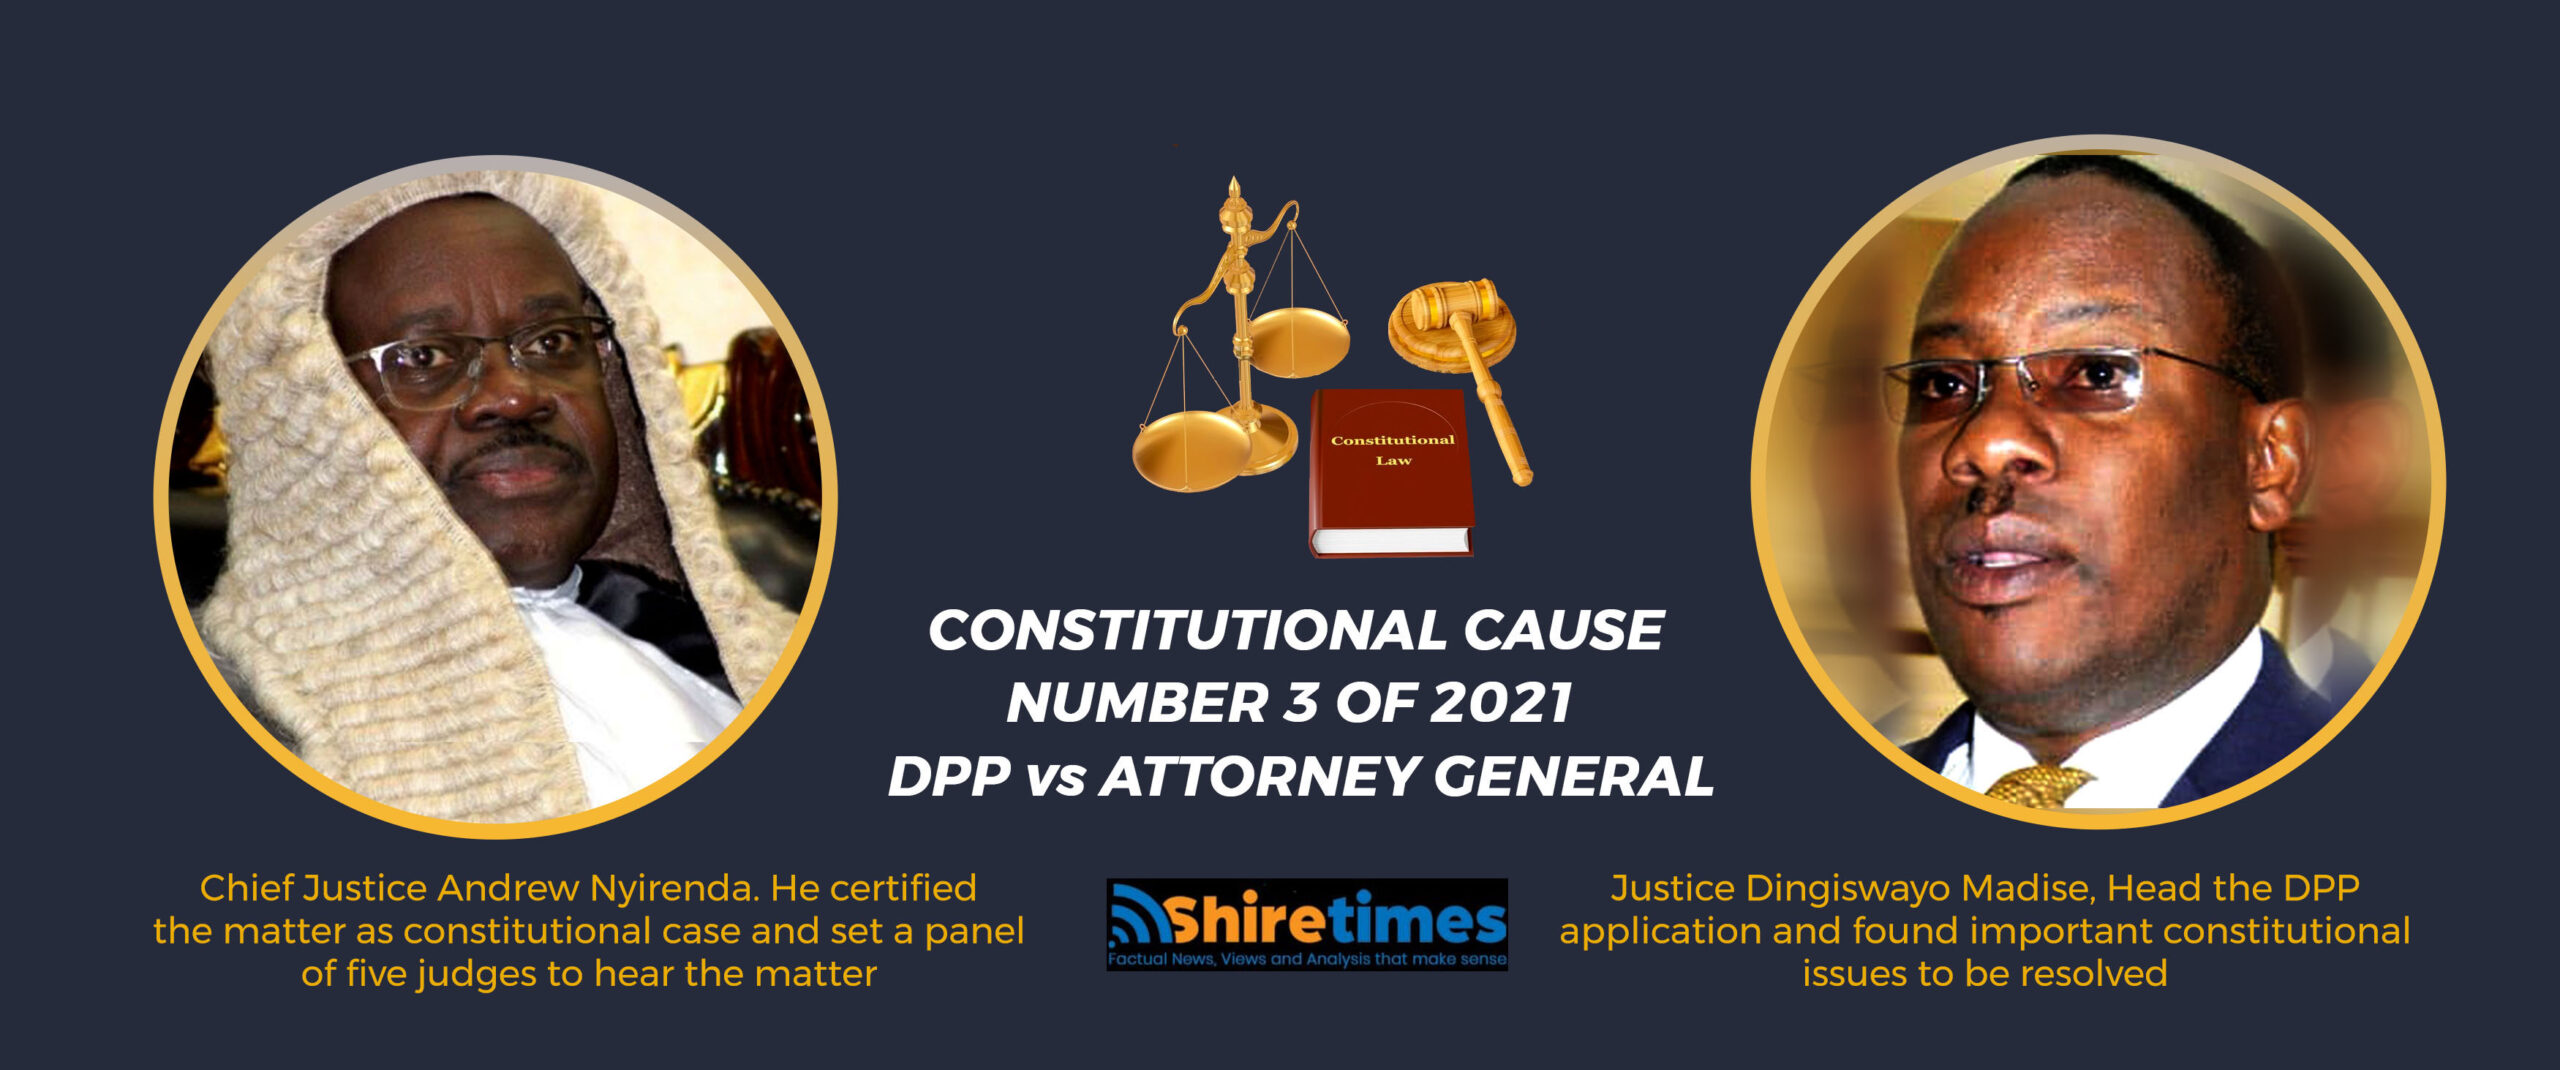 OUTLINING THE CASE IN WHICH DPP DRAGS THE ATTORNEY GENERAL TO COURT ...